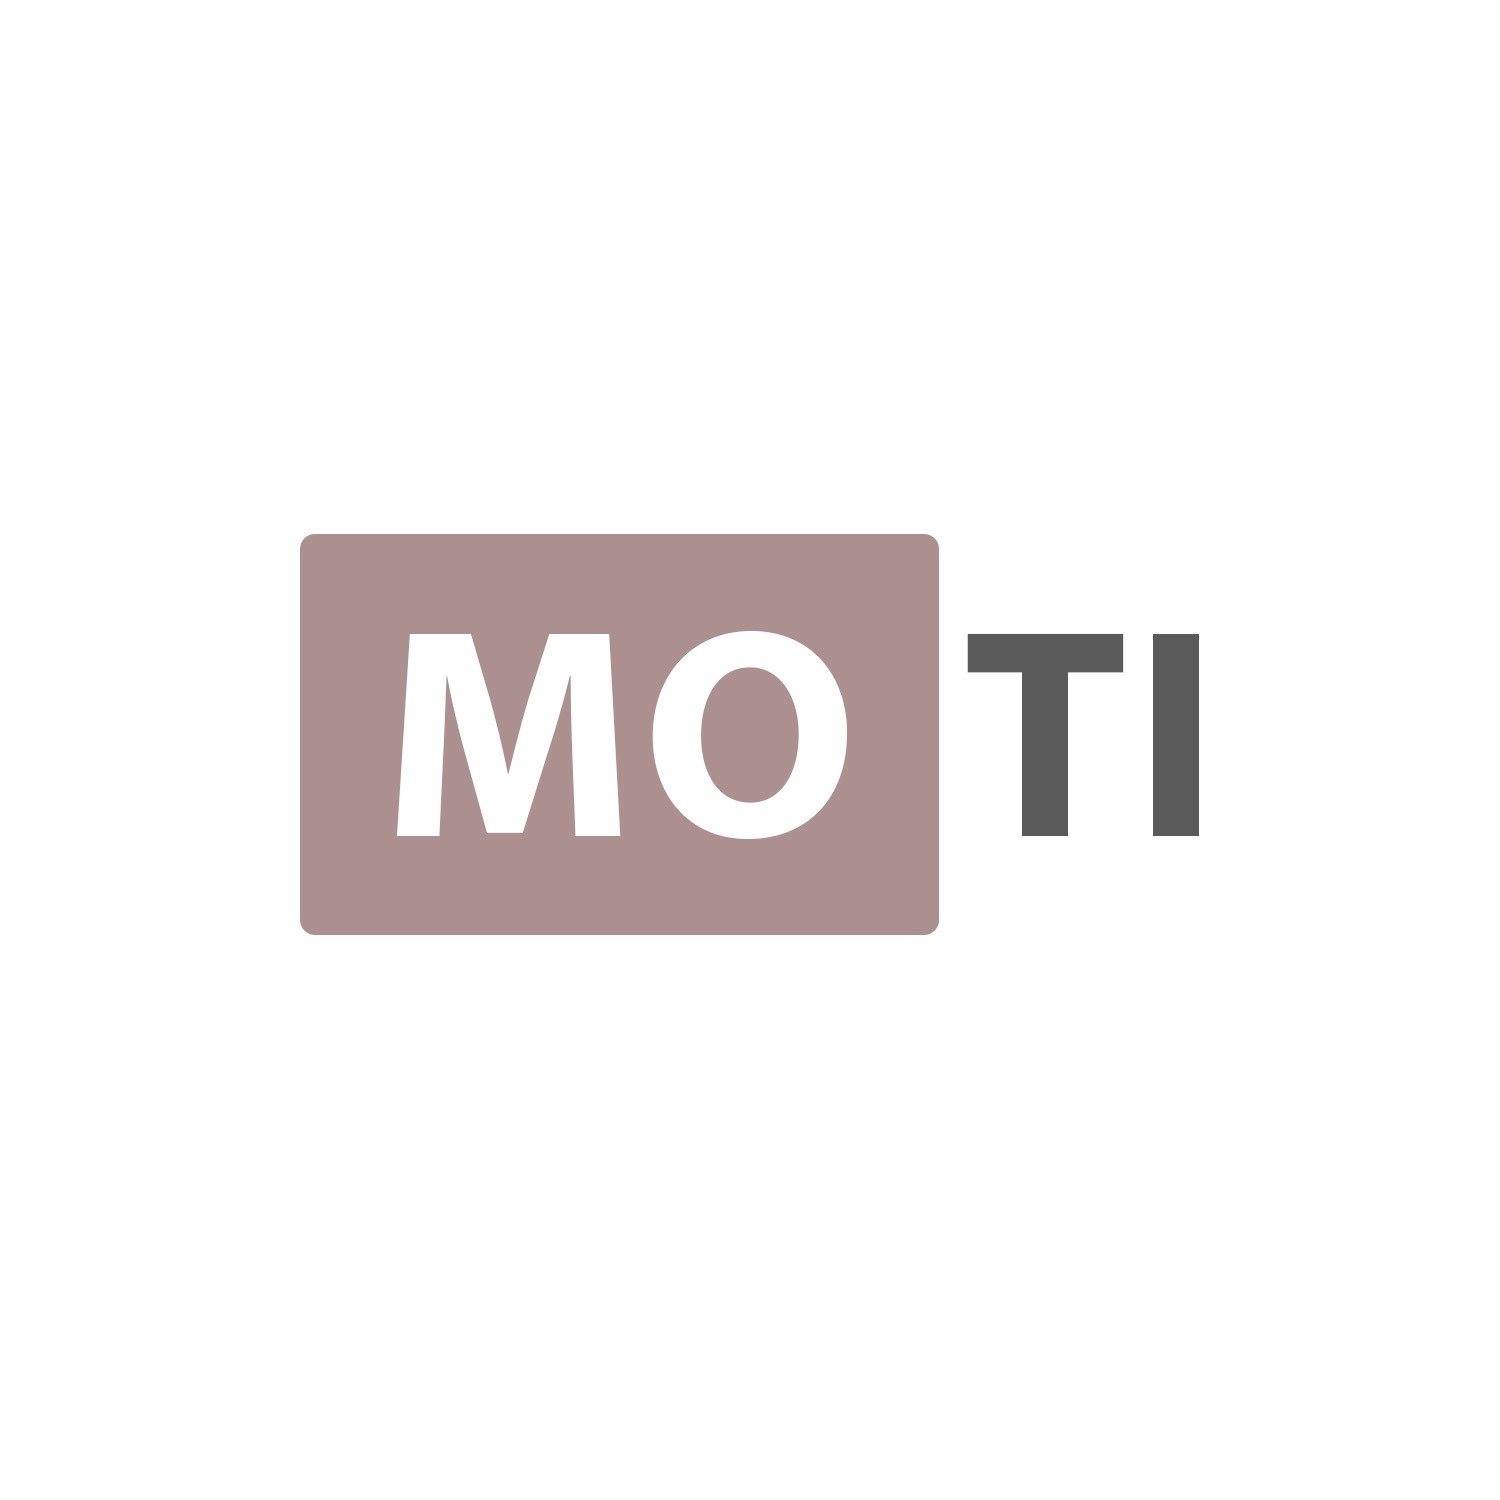 MOTI Official Store